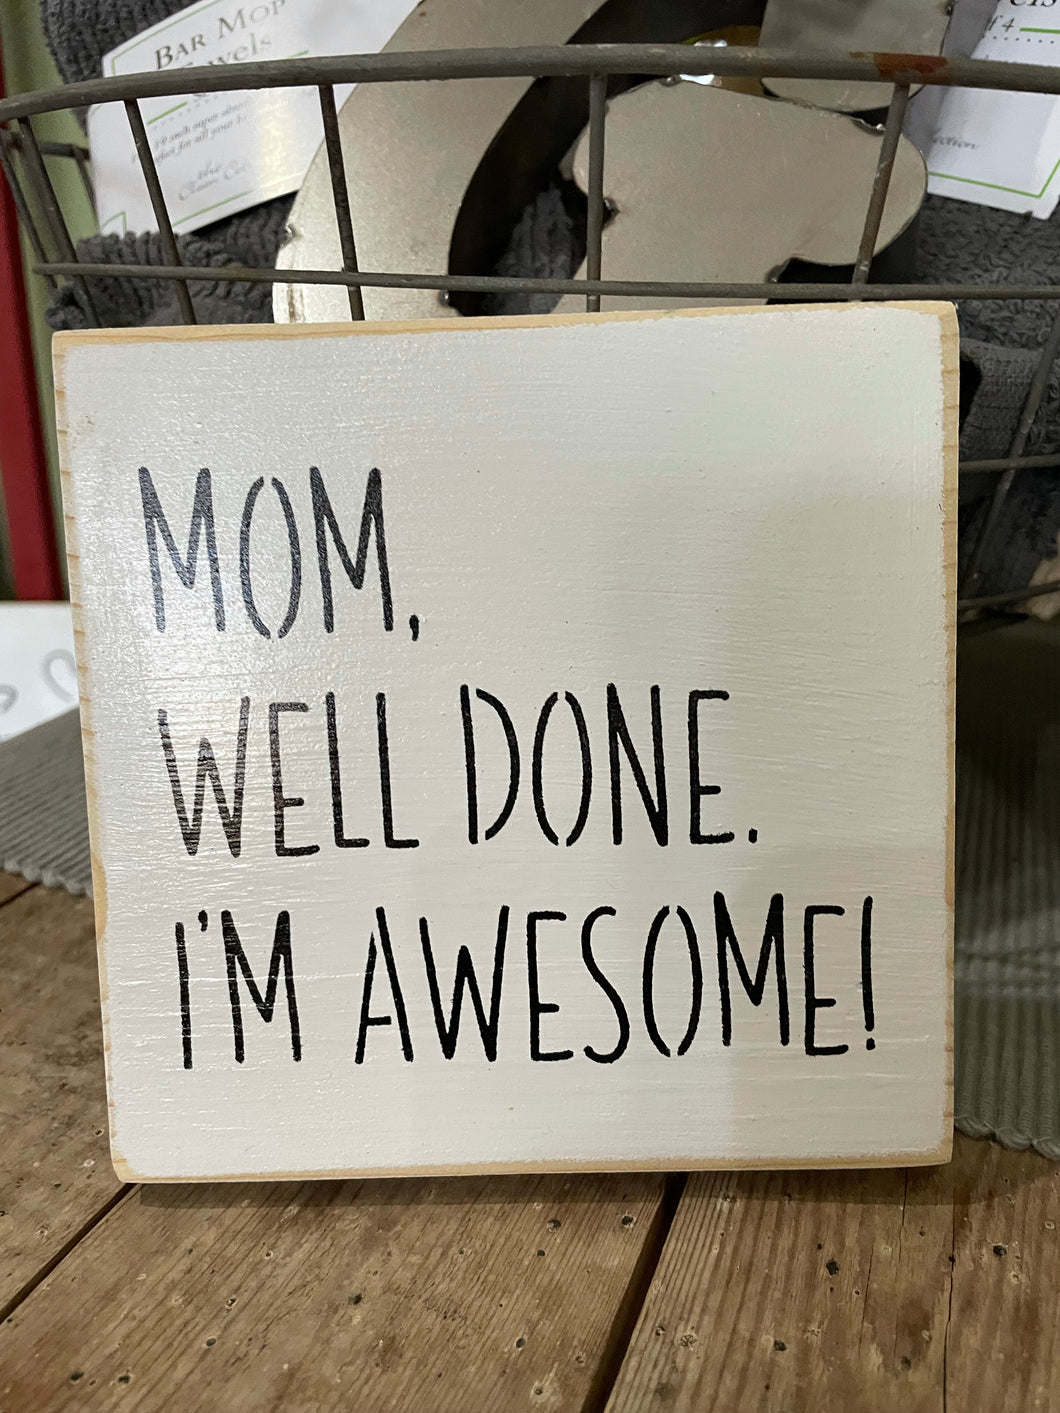 Mom, well done sign